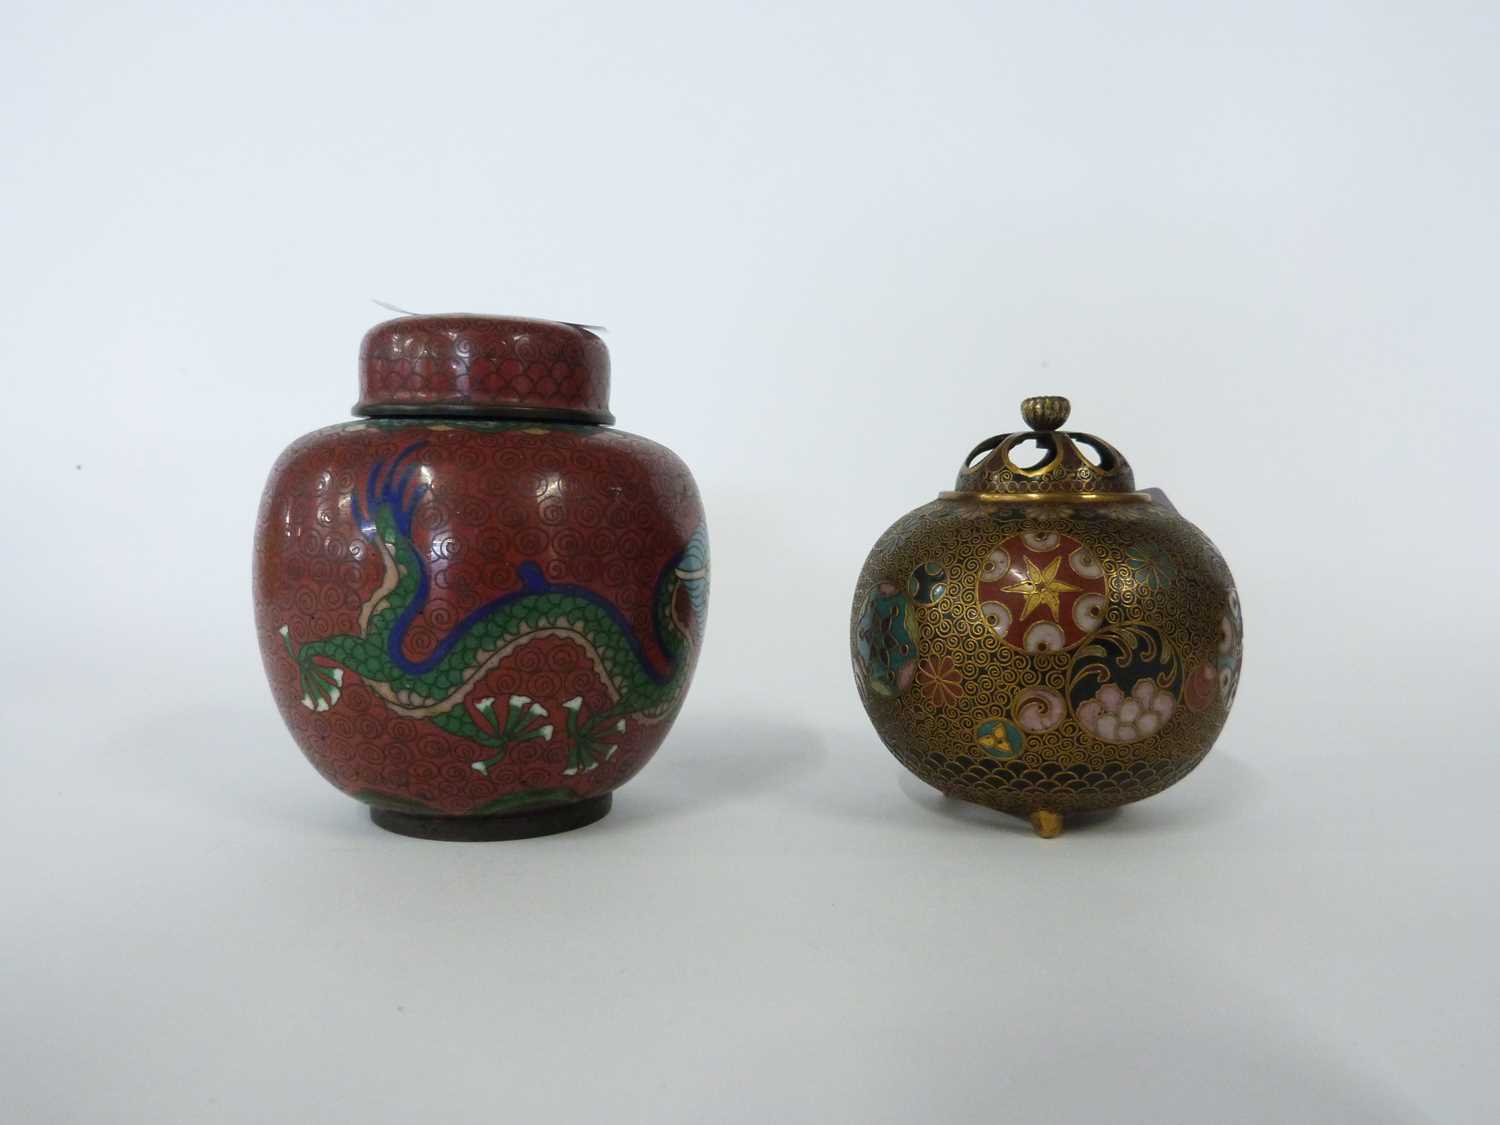 Cloisonne incense burner of globular form with pierced cover together with a small Cloisonne jar and - Image 13 of 36